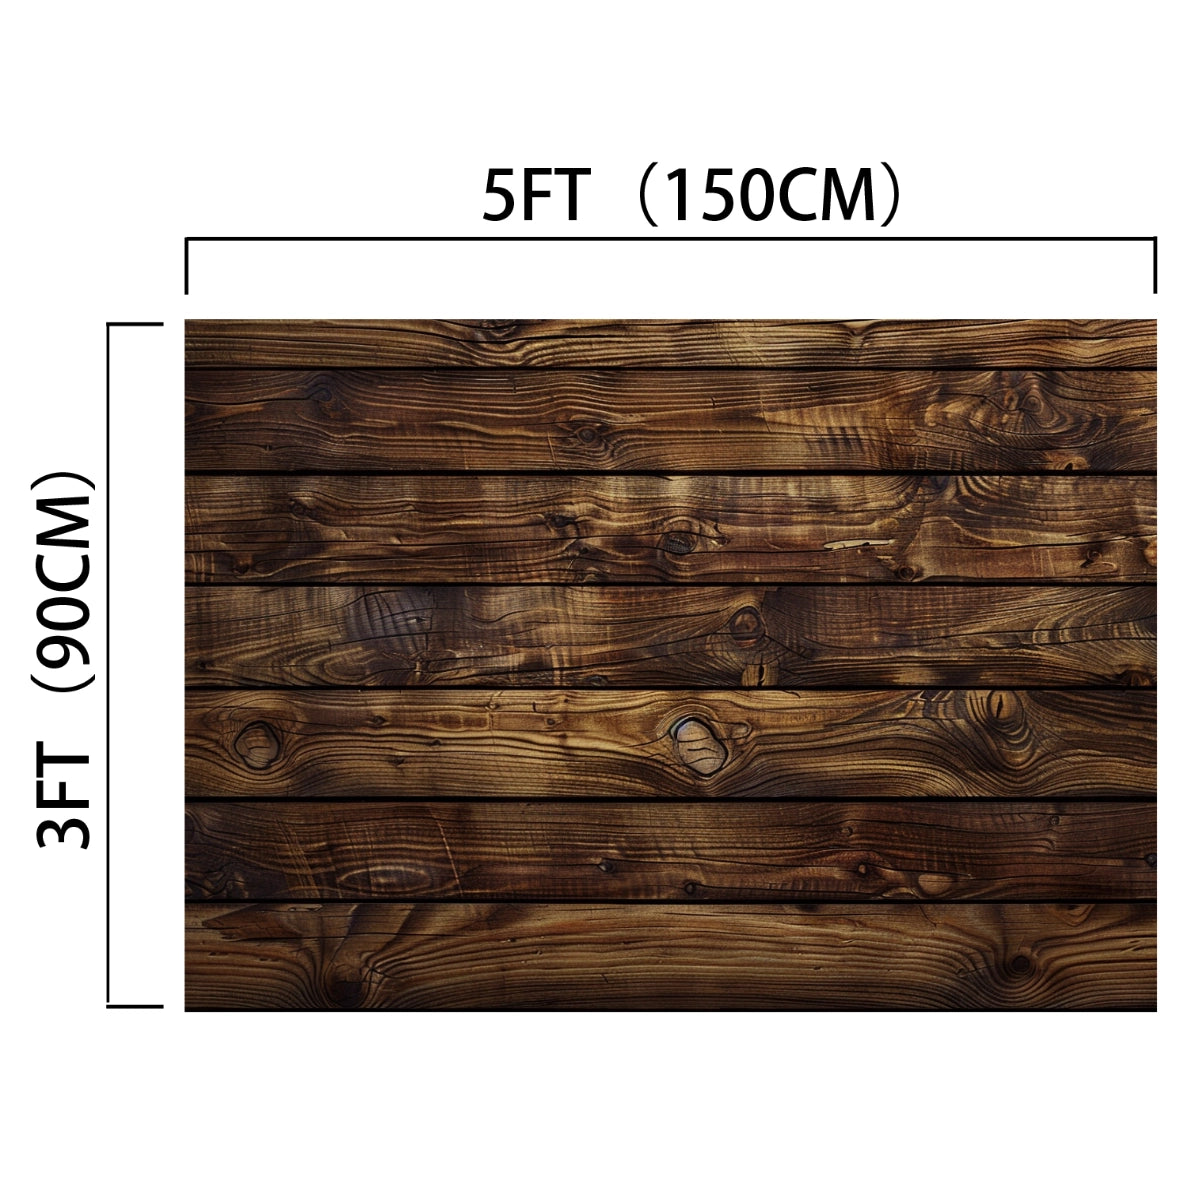 A rectangular wooden panel with horizontal planks, measuring 5 feet (150 cm) by 3 feet (90 cm), perfect as a Rustic Wood Wall Backdrop Natural Brown Wooden Board Photography Background Baby Shower Birthday Party Cake Table Decor. Dimensions are labeled around the edge of the image. The product is from ideasbackdrop.